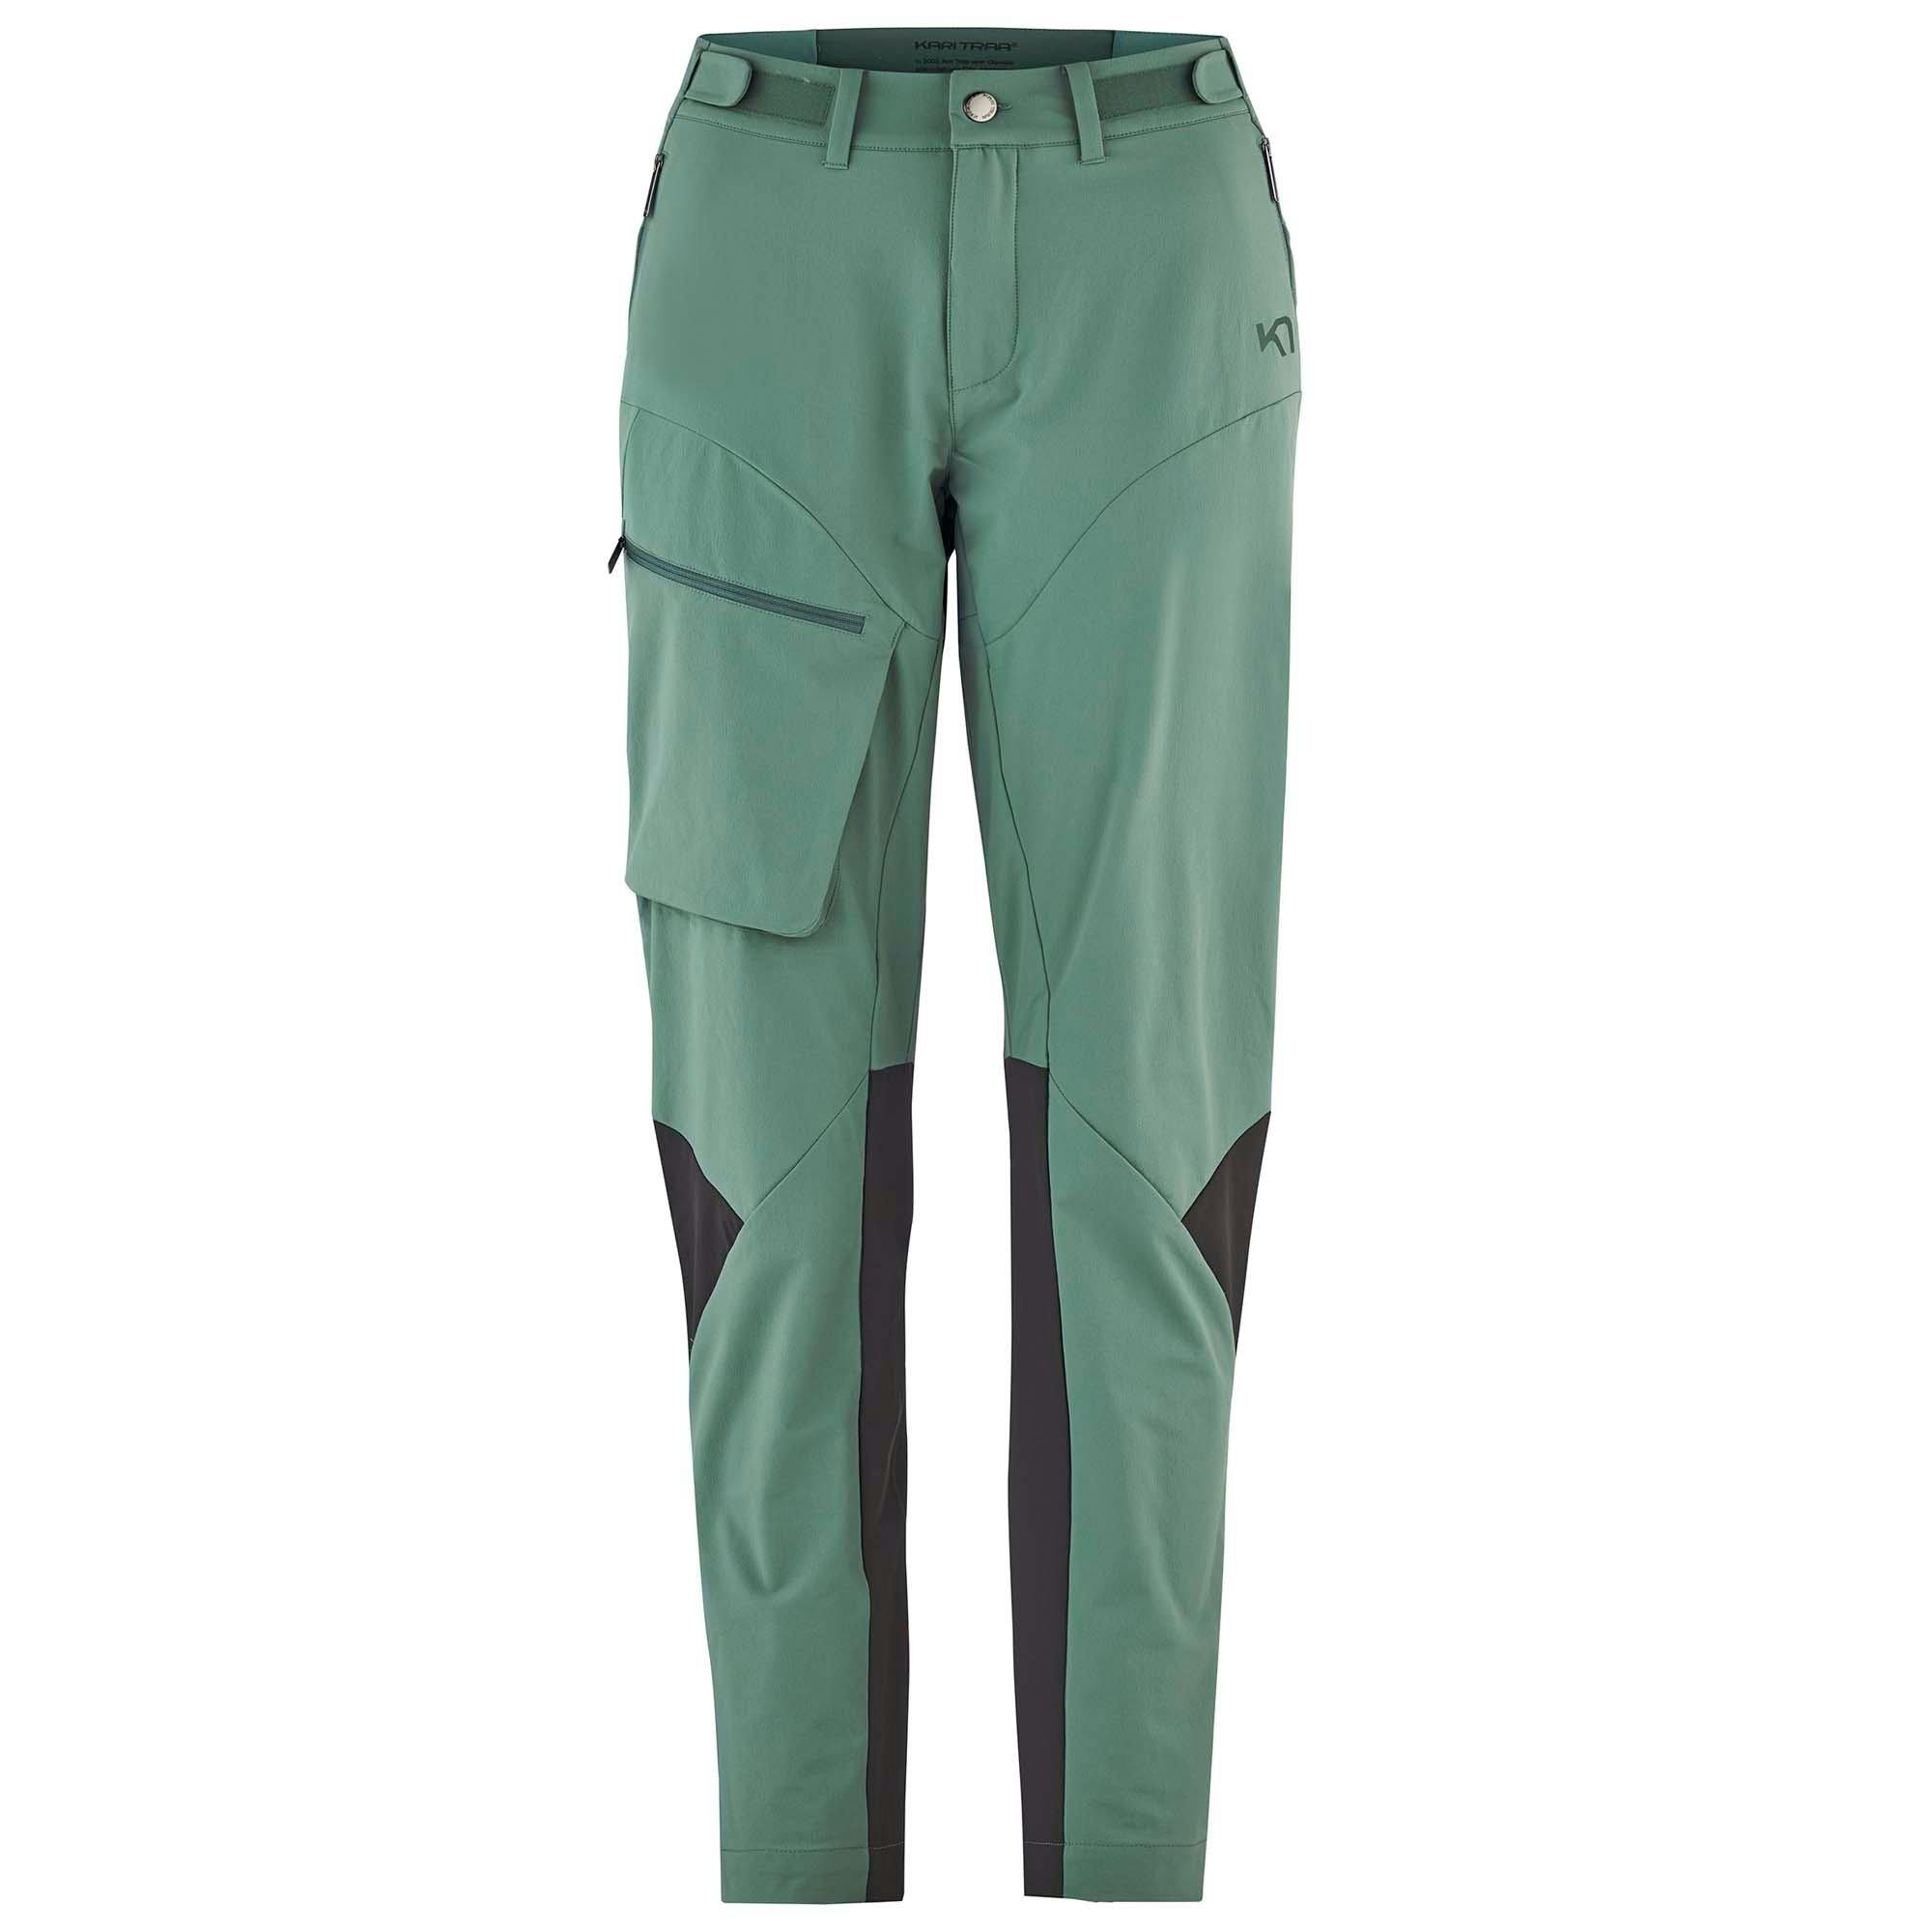 Product image for Voss Pant - Women's